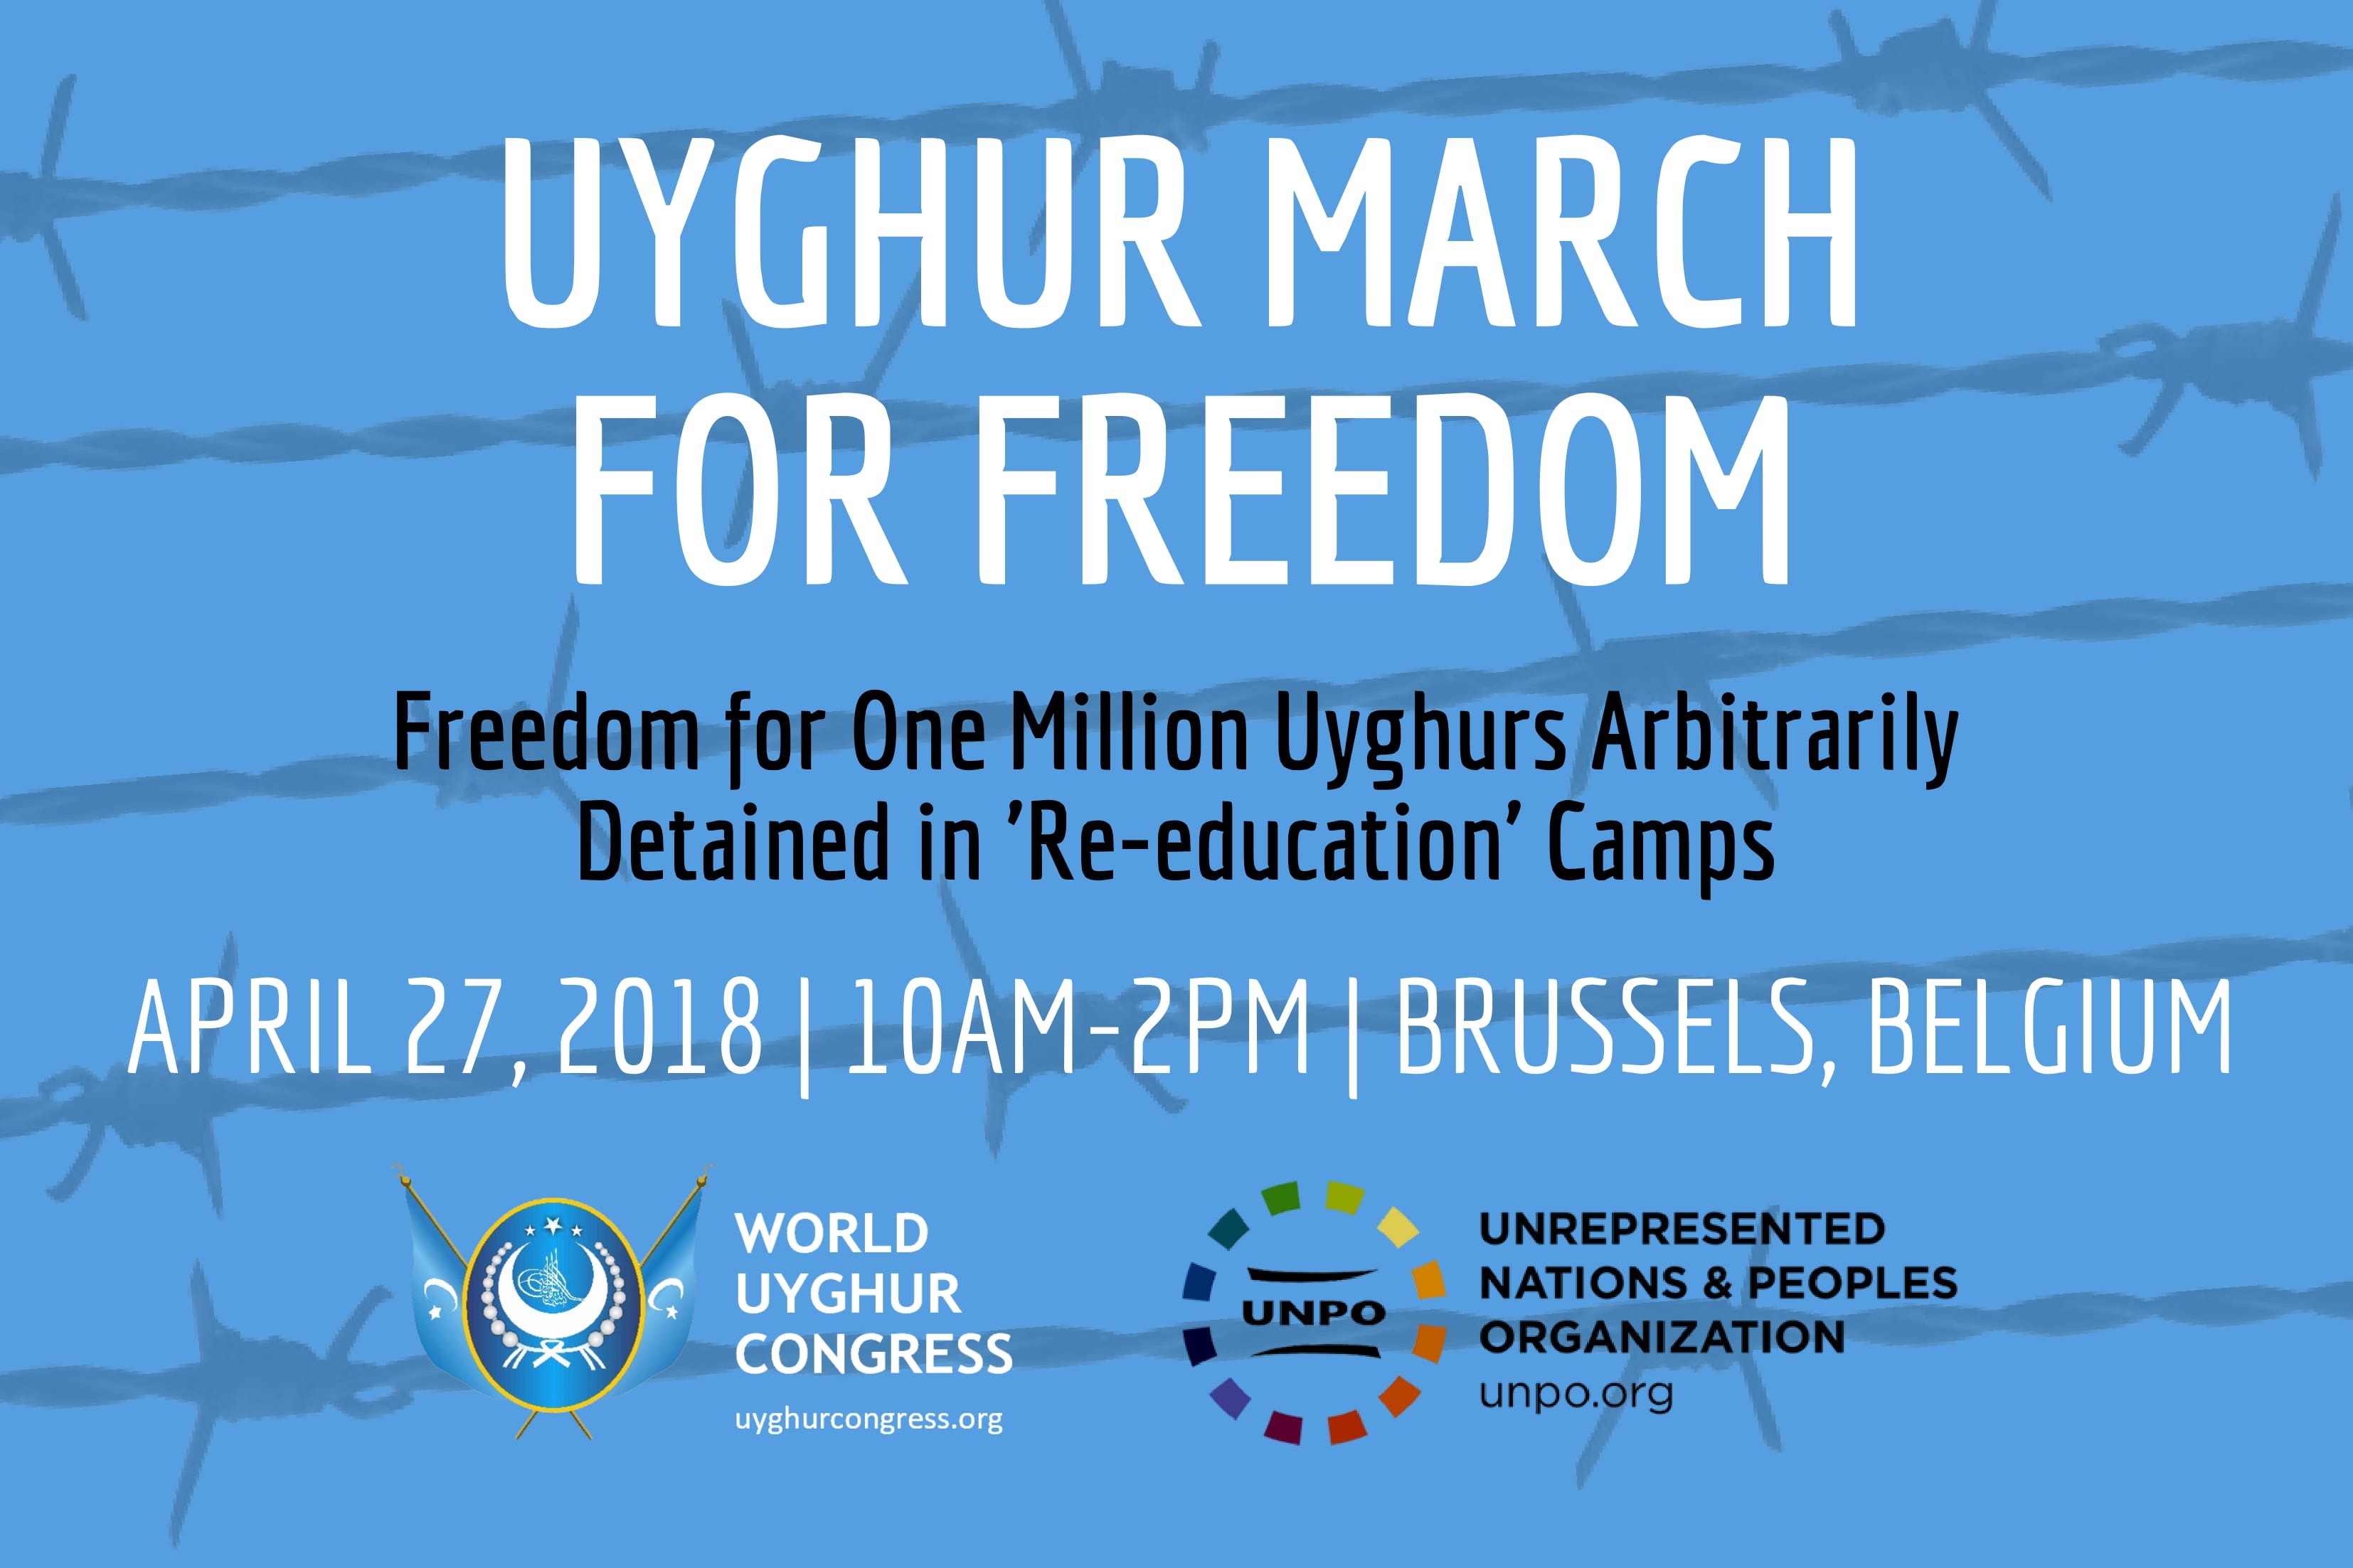 PRESS RELEASE: Thousands of Uyghurs to Protest Against ‘Re-education’ Camps on April 27th in Brussels